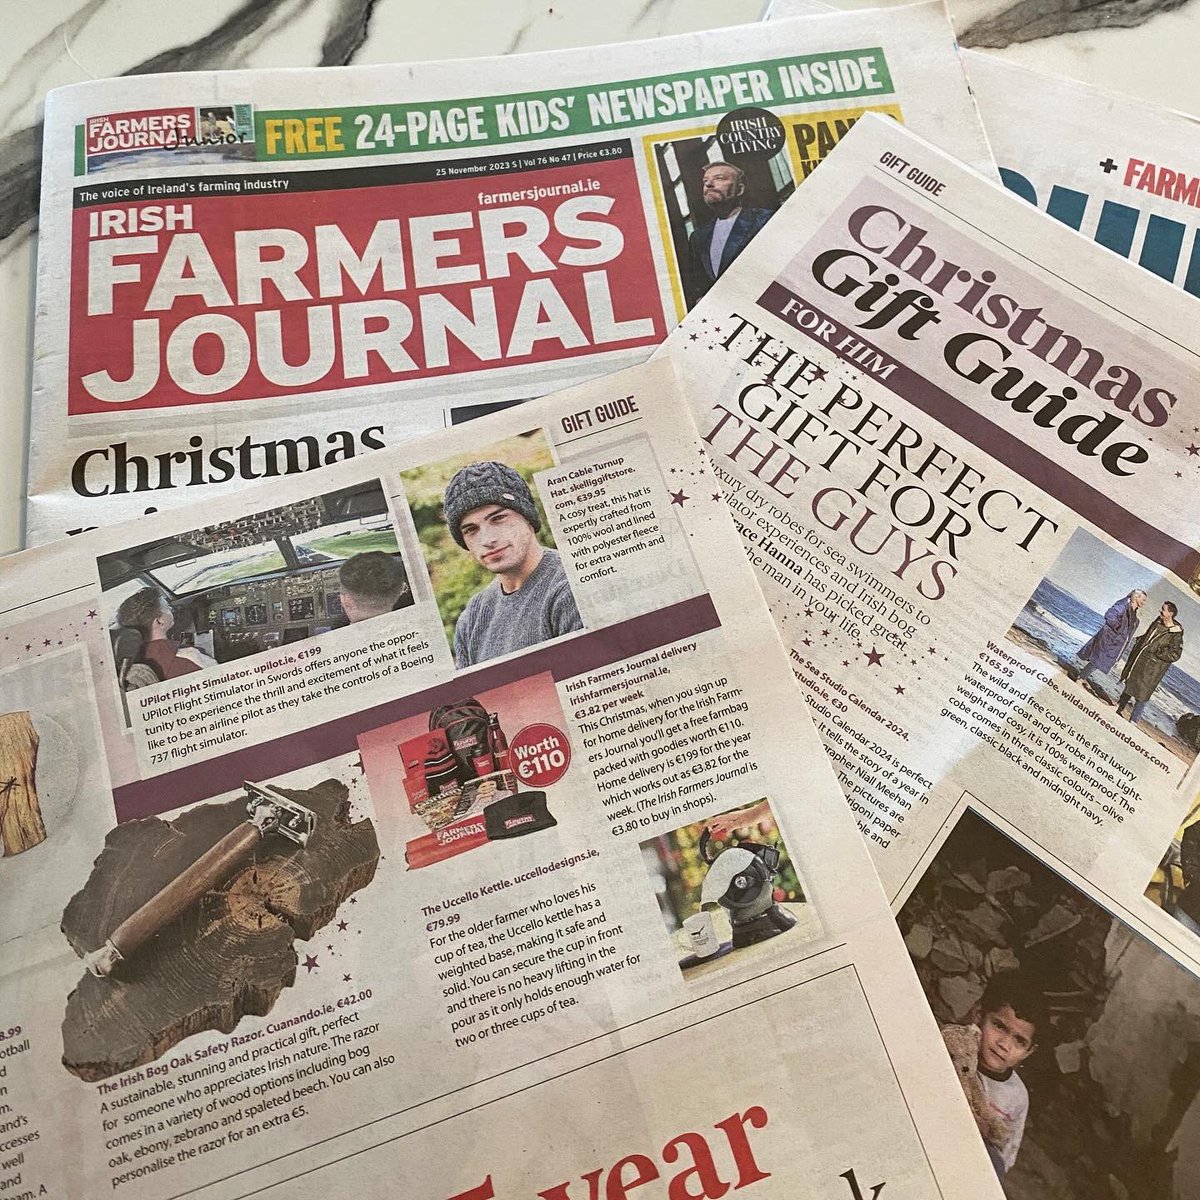 Today’s @farmersjournal published a #ChristmasGiftGuide for Him

Our #UccelloKettle made the cut and the team over at the Farmers Journal loved it 🥰  “Ideal for the older #farmer who loves his tea” they said: especially with the colder weather setting in.